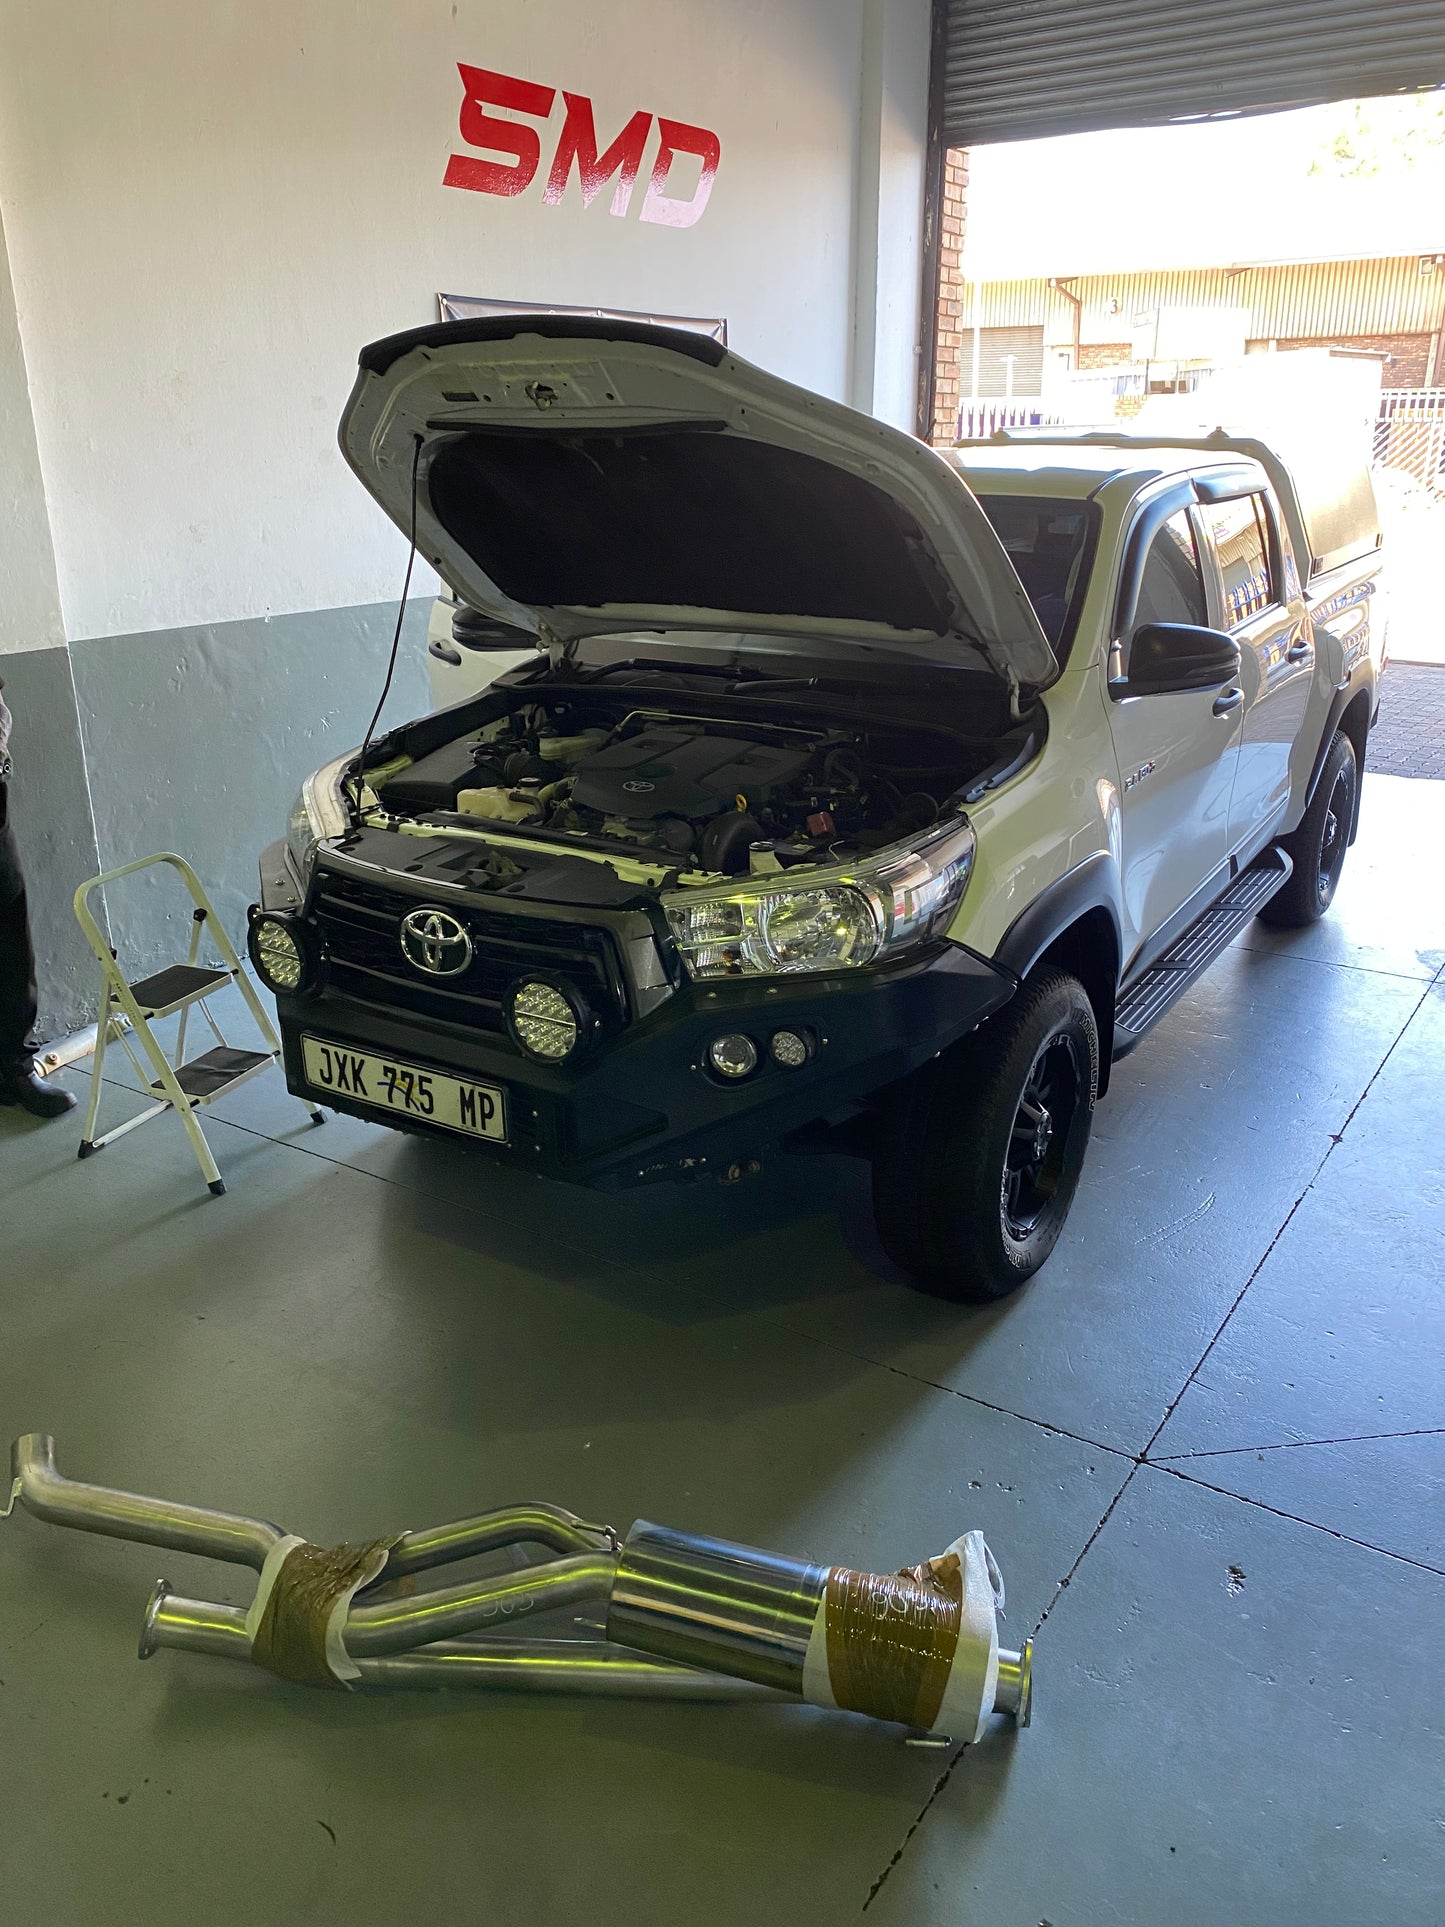 Toyota Hilux 2.4 GD6 Full bolt on exhaust system